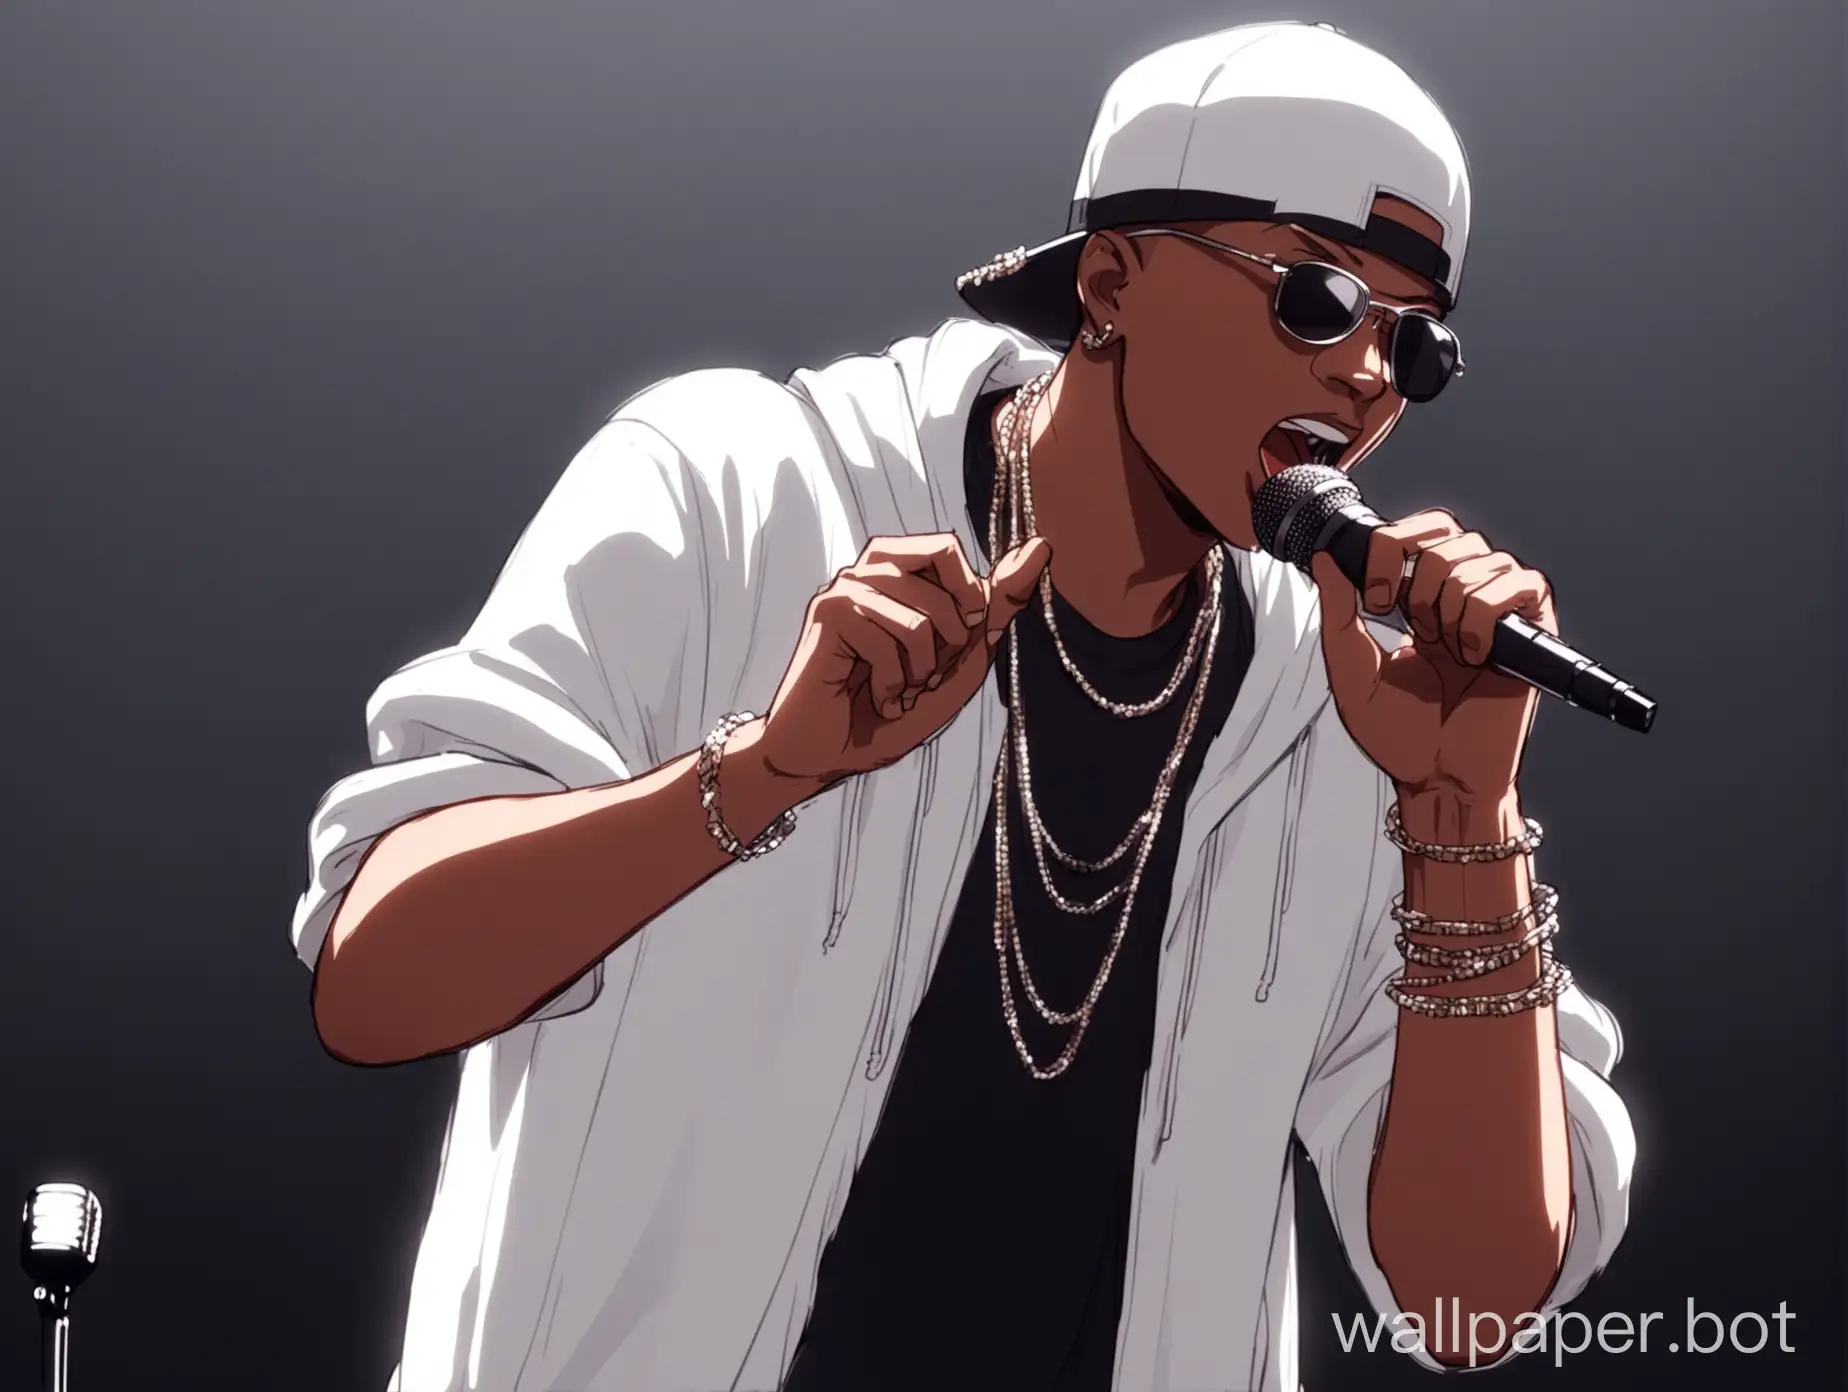 the character is male and seems to be holding a microphone and rapping and is white